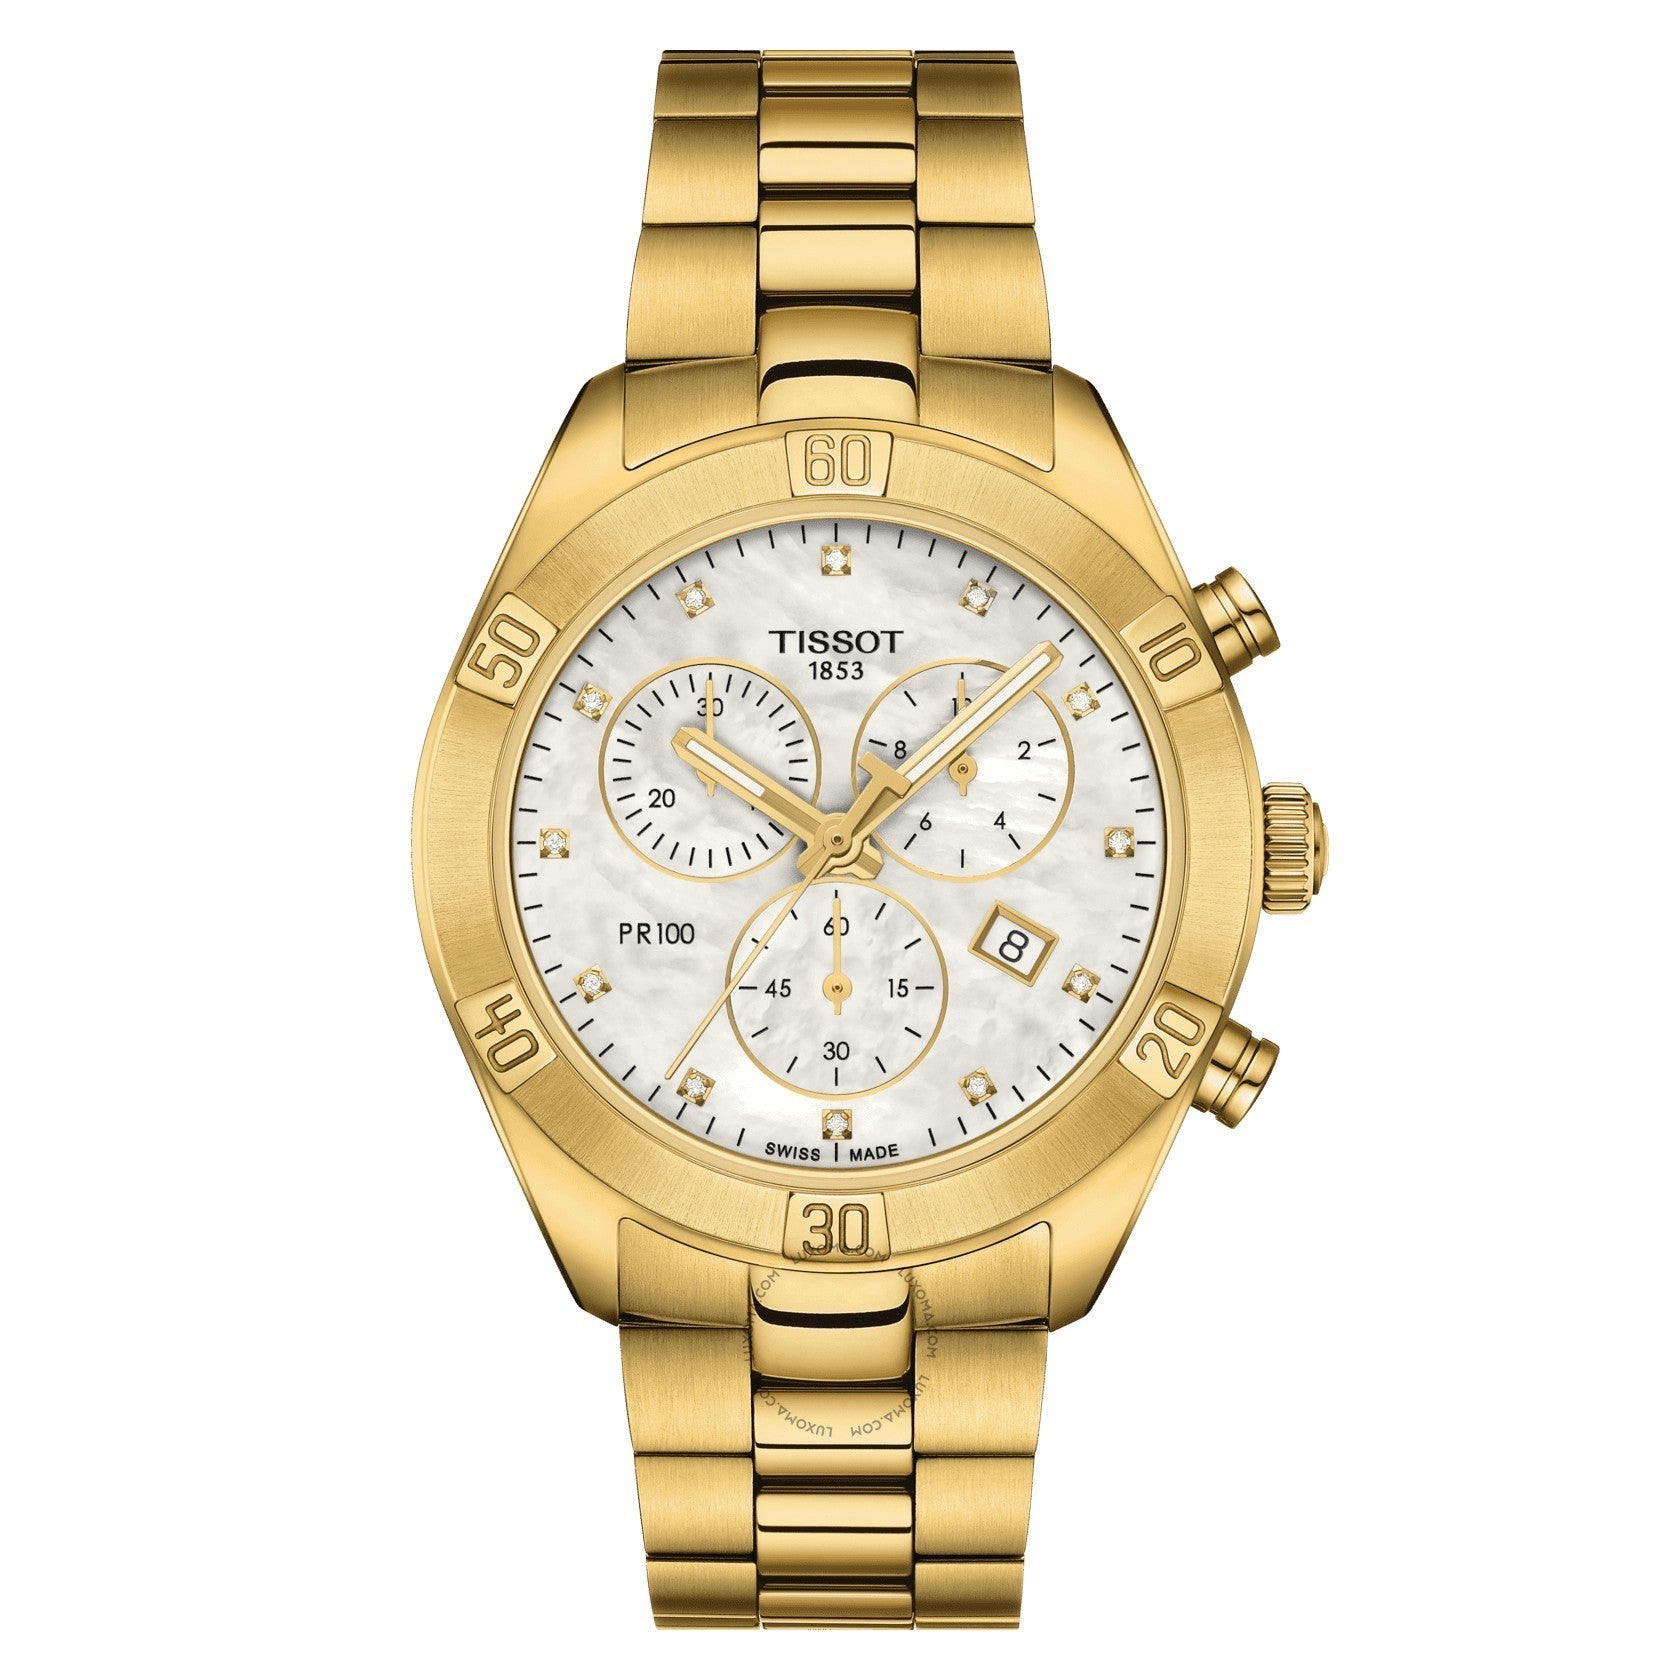 Tissot T-Classic Chronograph White Mother-of-Pearl Dial Ladies Watch T101.917.33.116.01